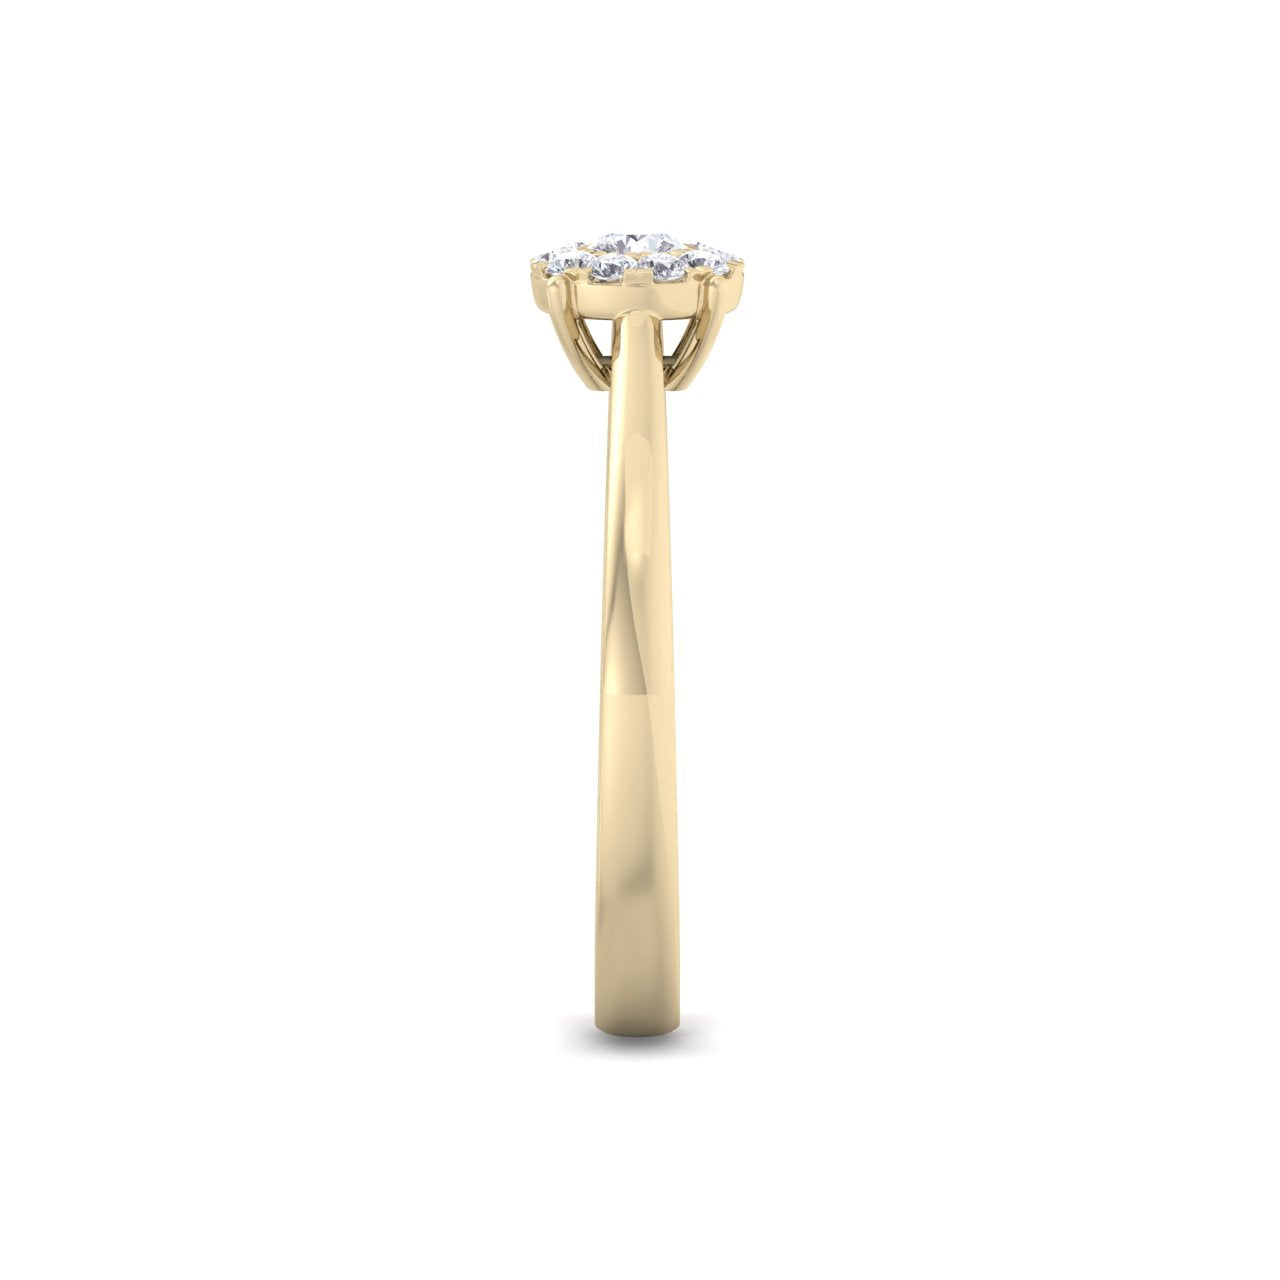 Halo engagement ring in yellow gold with white diamonds of 0.15 ct in weight